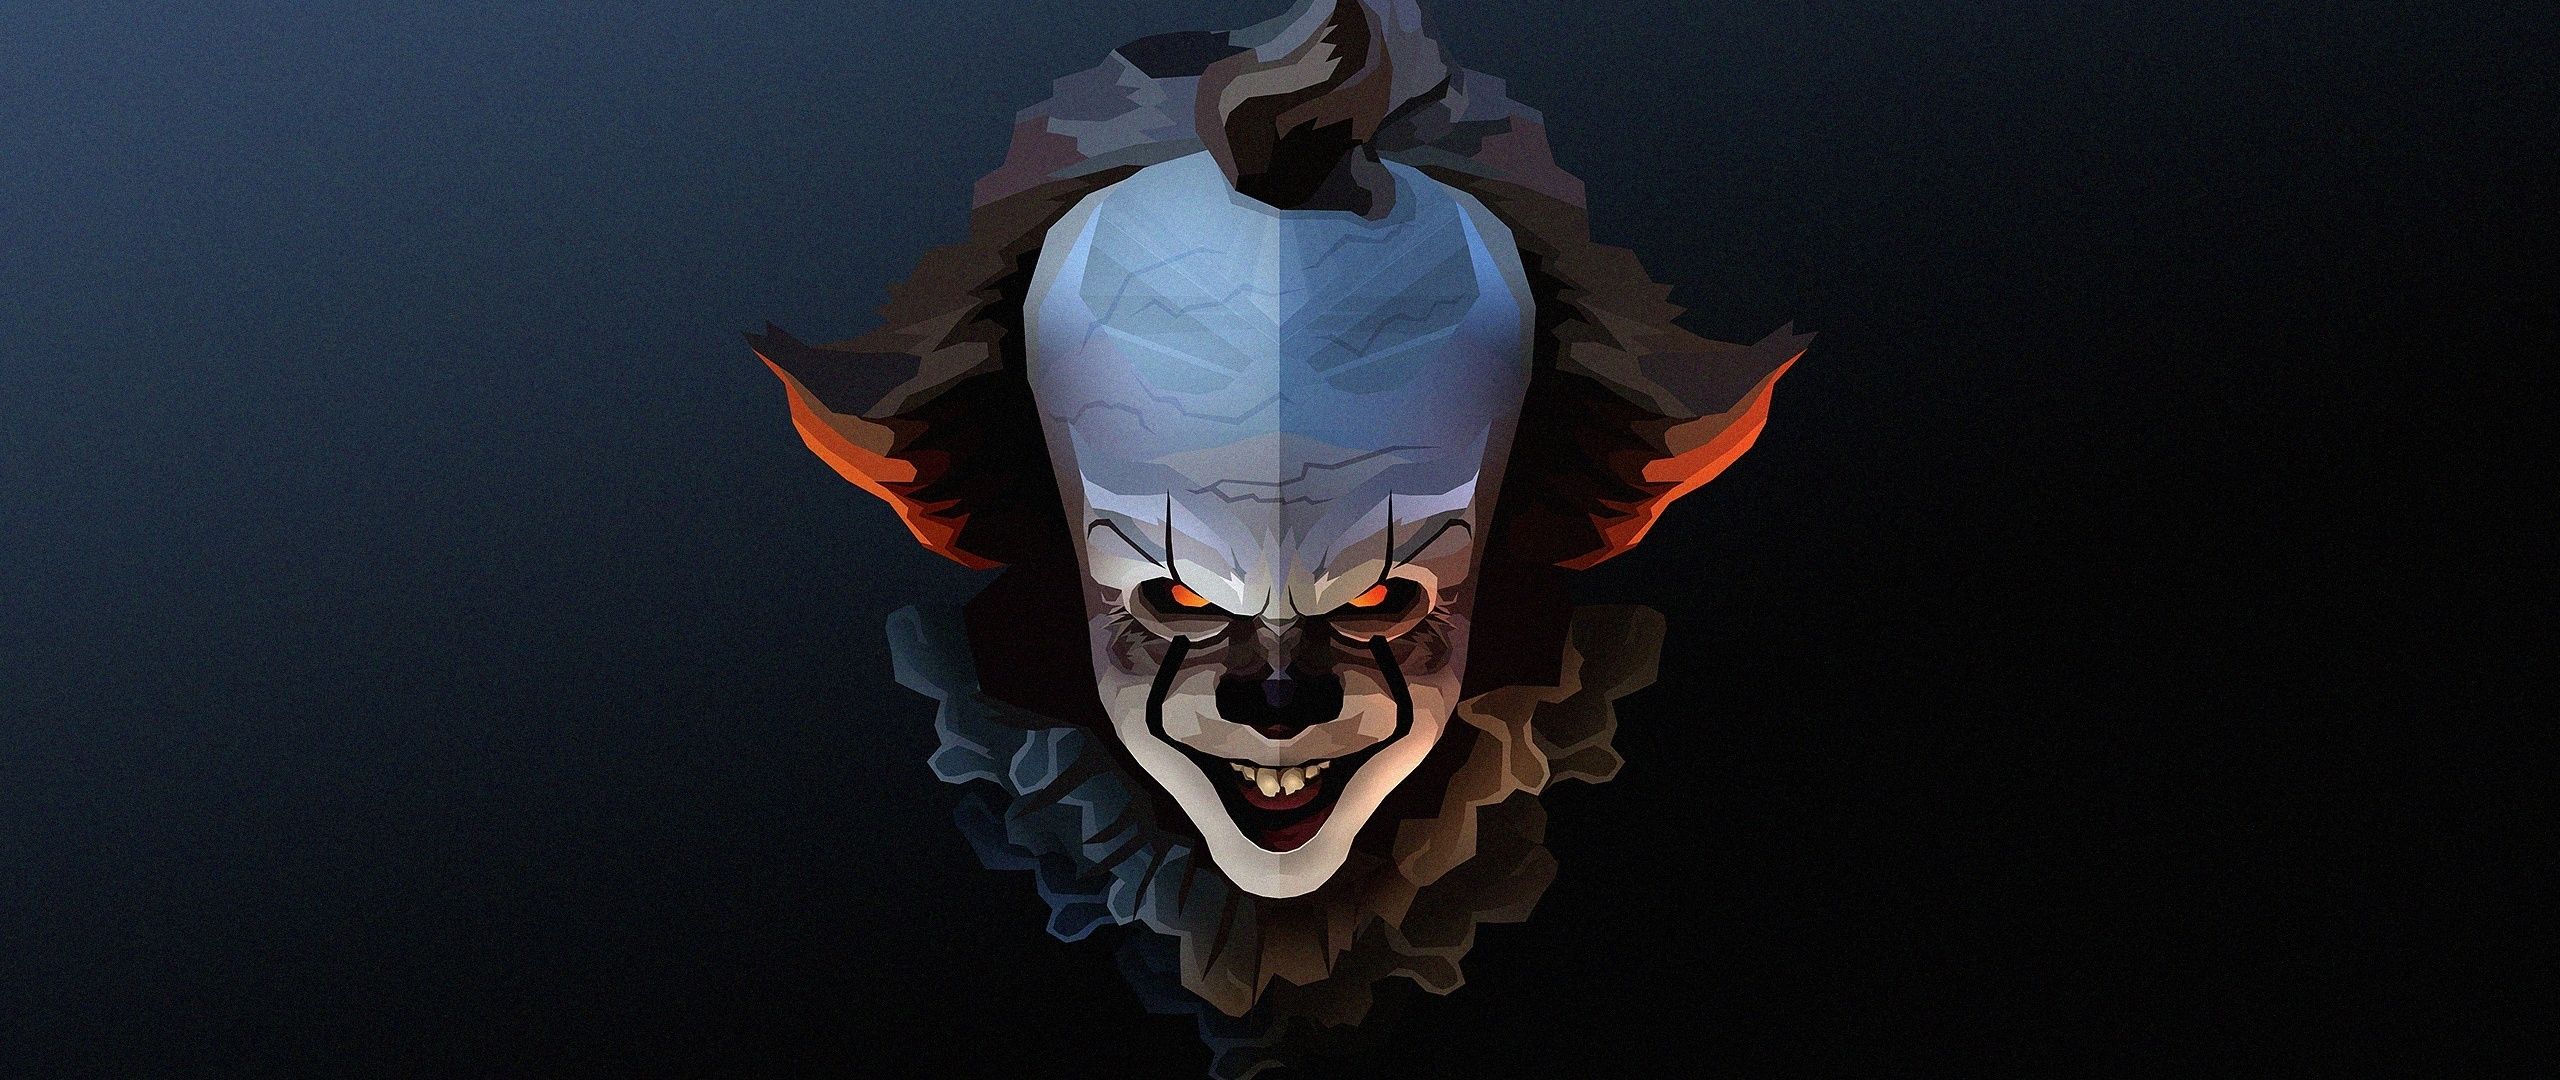 Download 2560x1080 wallpaper pennywise, the clown, halloween, artwork, dual wide, widescreen, 2560x1080 HD image, background, 15107